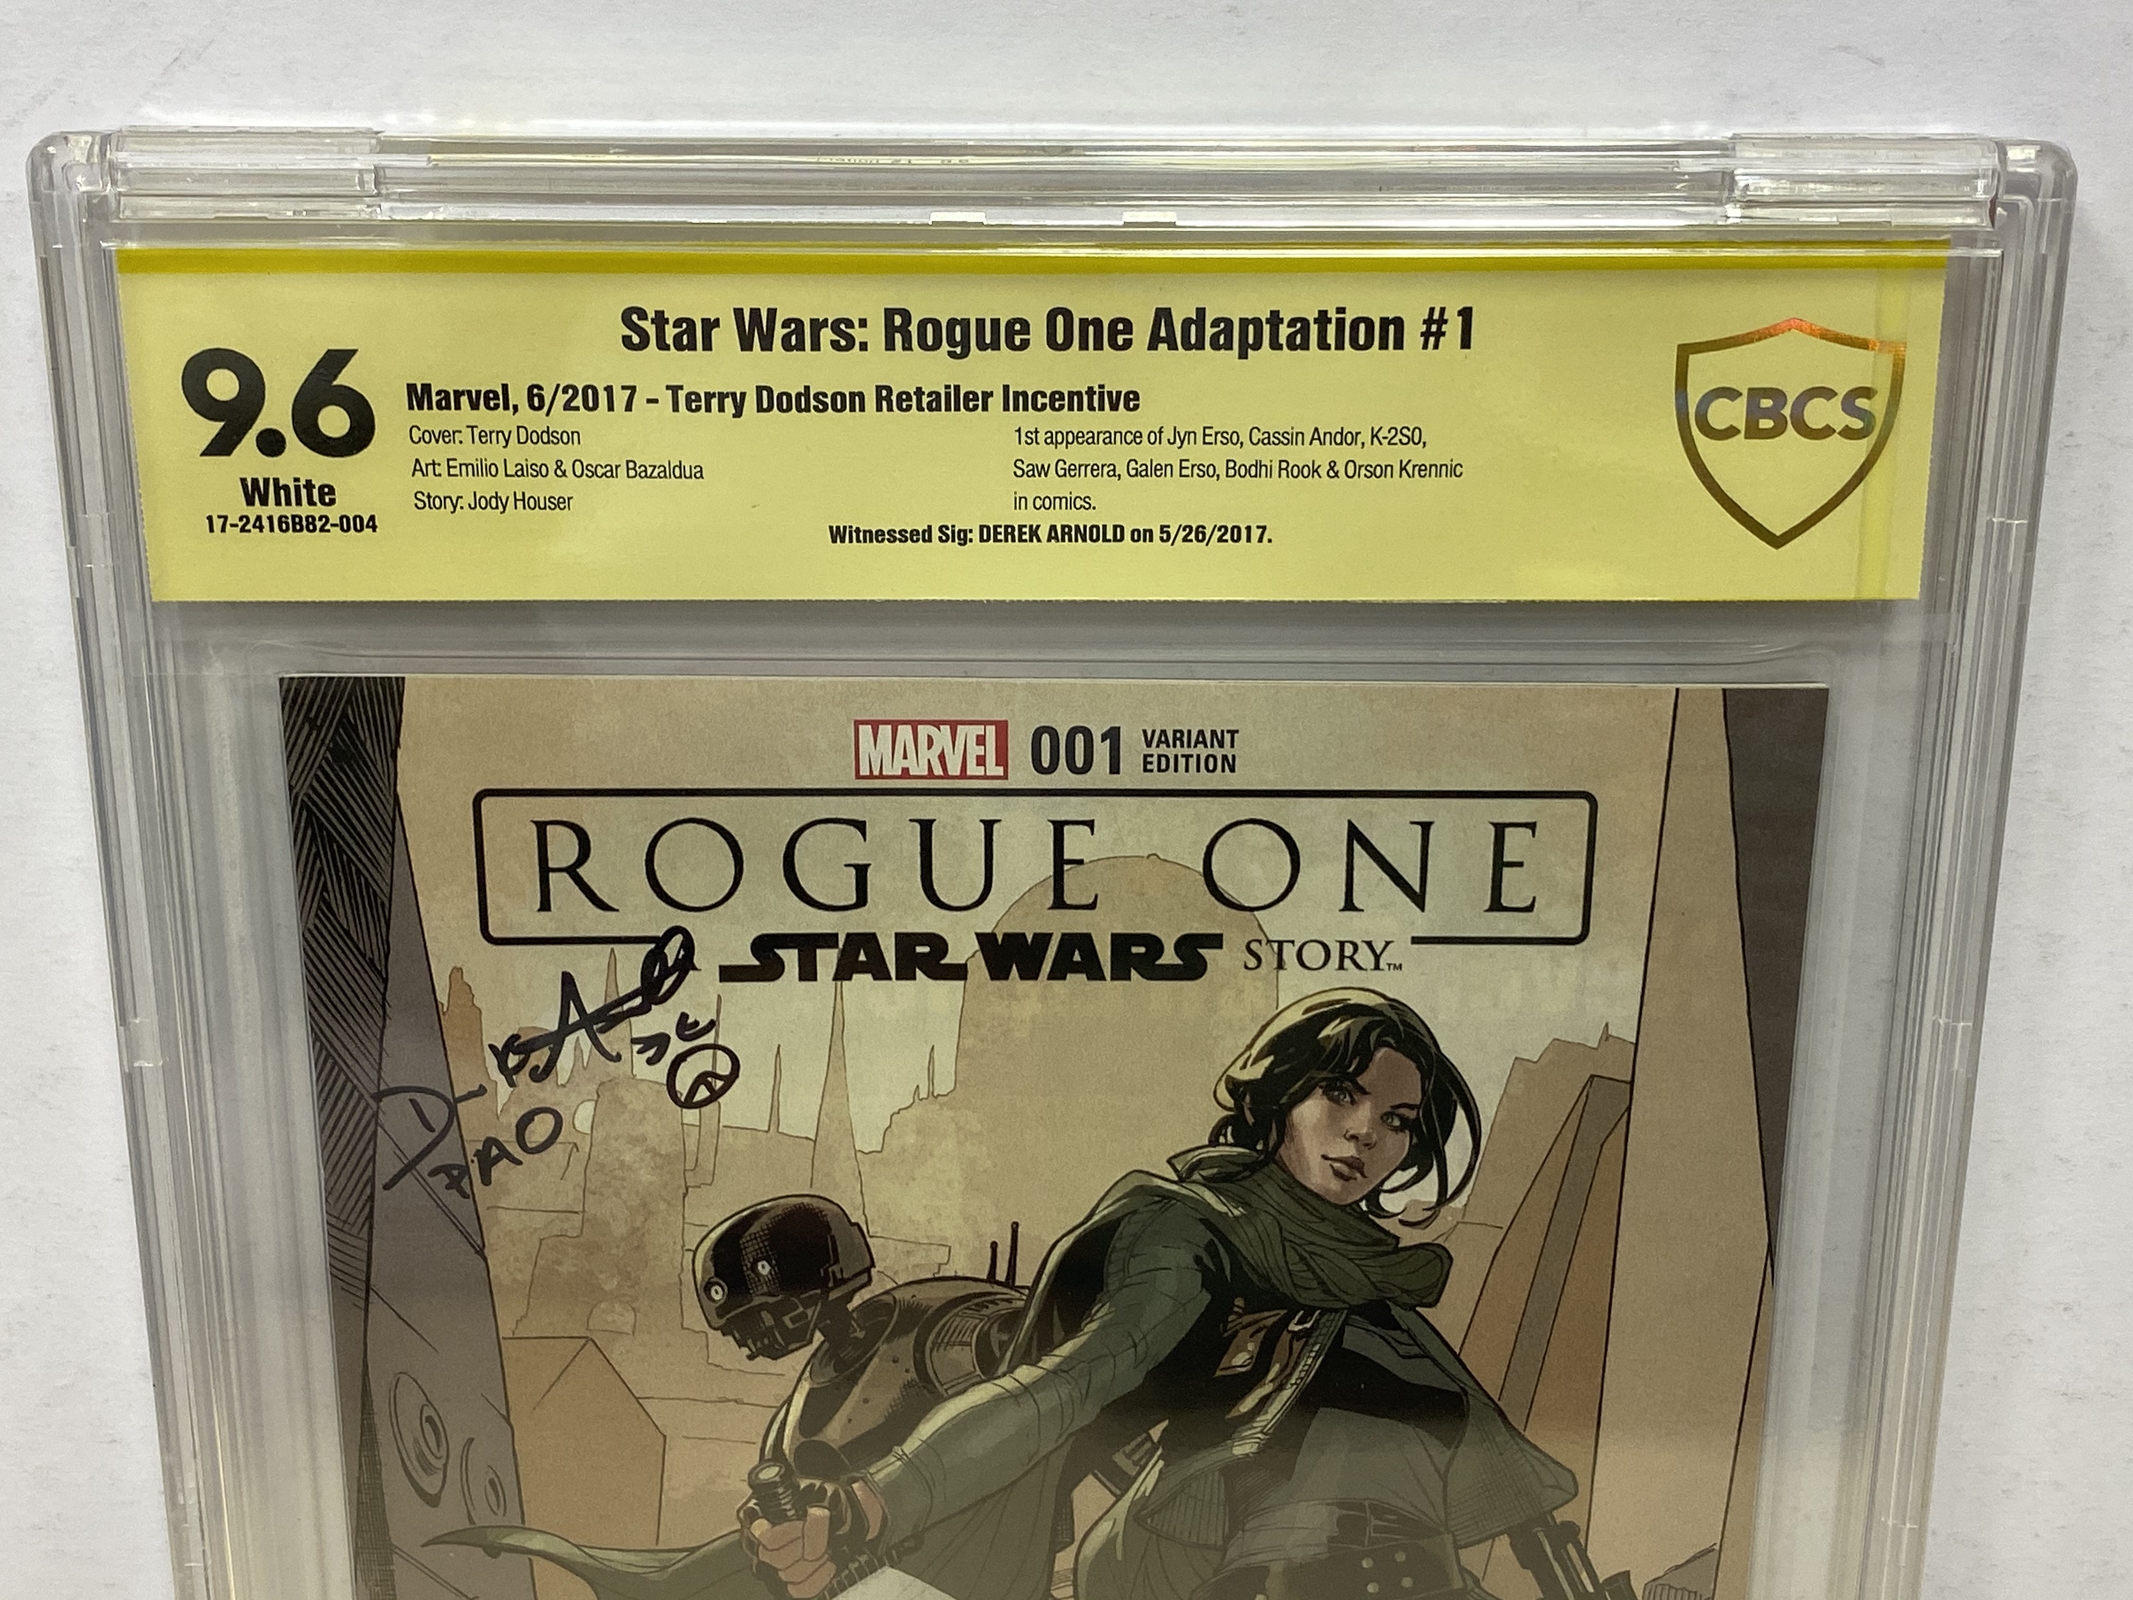 STAR WARS: ROGUE ONE ADAPTATION #1 (2017 - MARVEL) Graded CGC 9.6 Signature Series - (Cents - Image 2 of 4